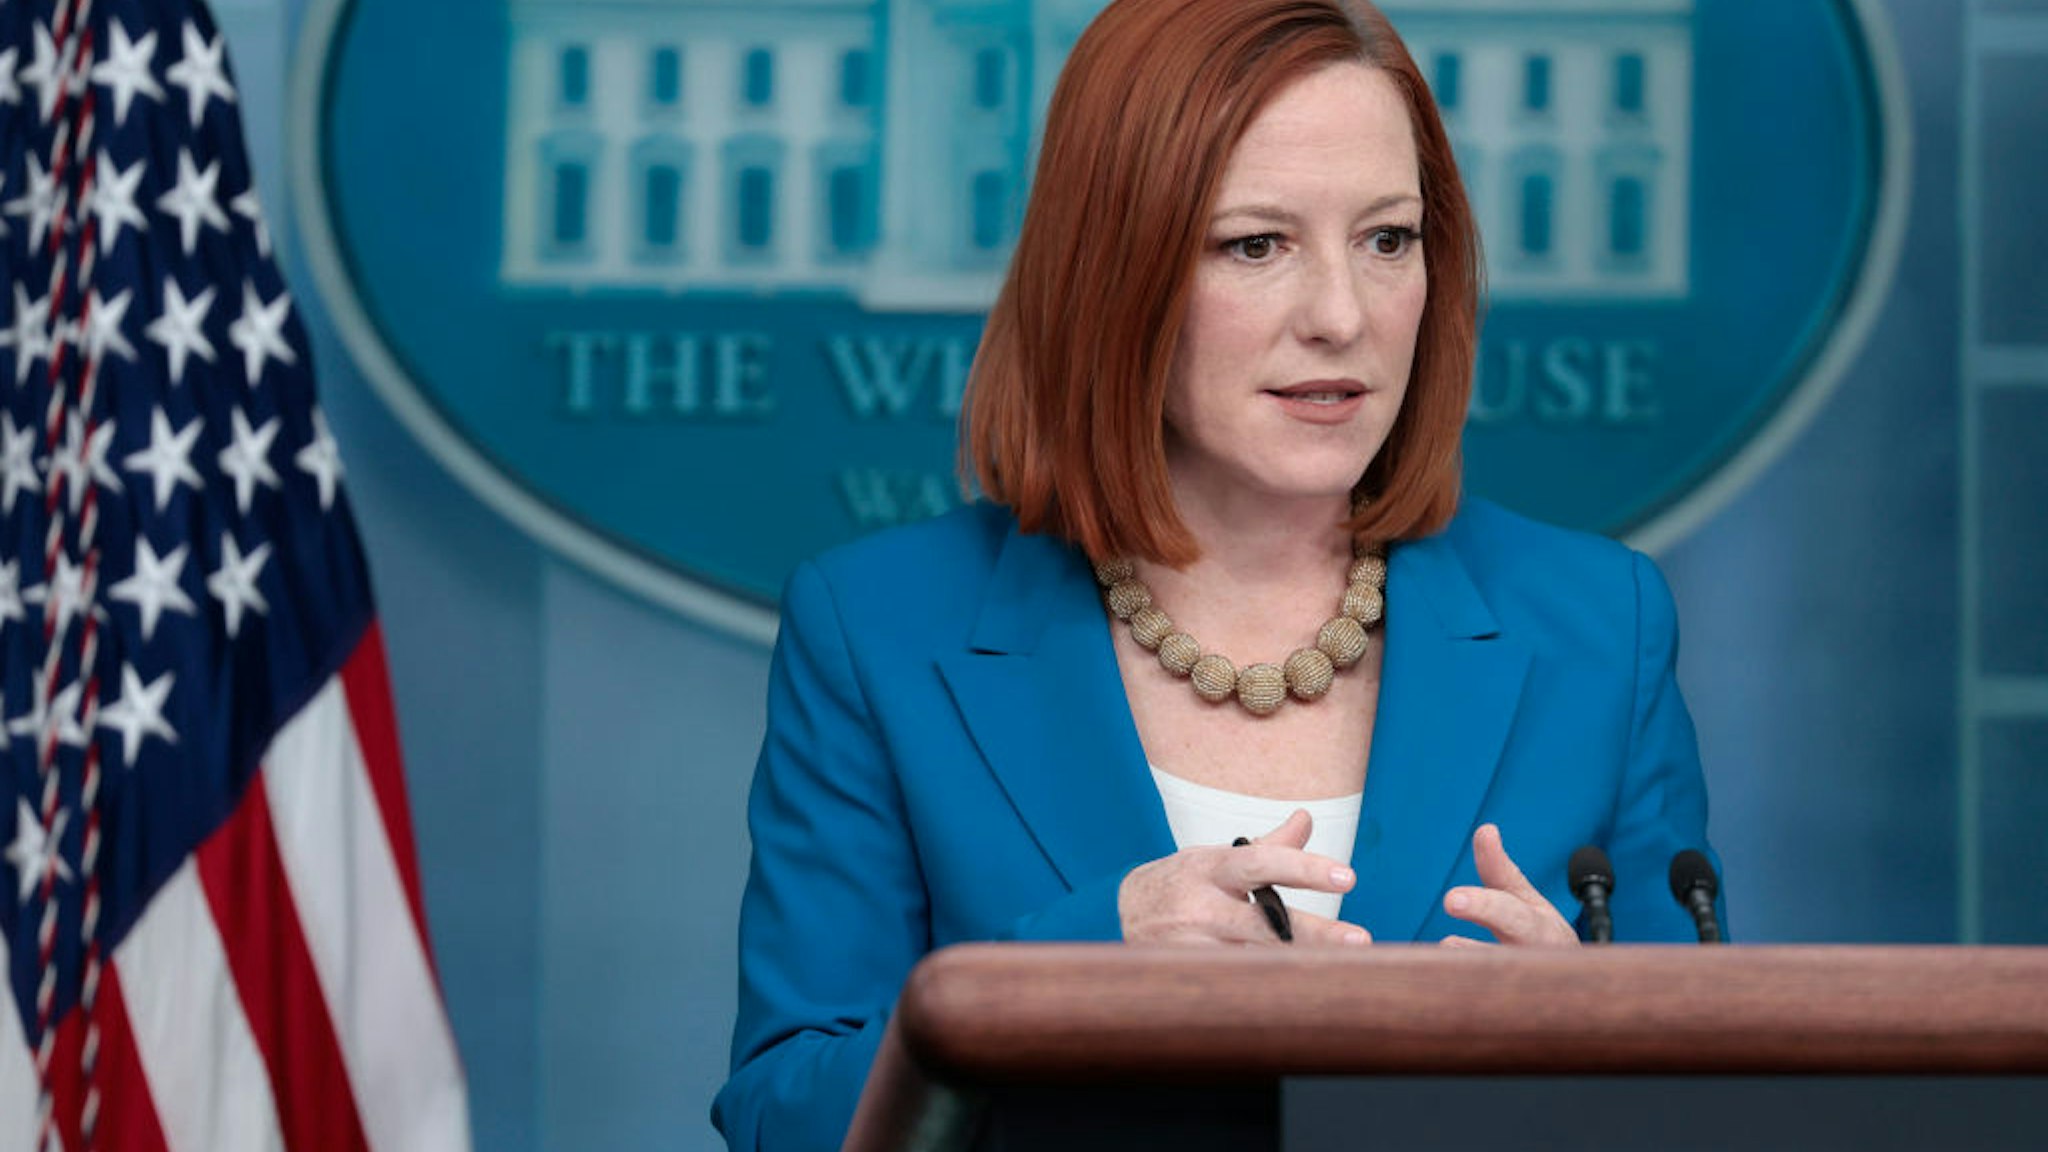 WASHINGTON, DC - FEBRUARY 28: White House press secretary Jen Psaki speaks during the daily press briefing on February 28, 2022 in Washington, DC. During the briefing Psaki previewed the remarks U.S. President Joe Biden will give during his first State of the Union address tomorrow. (Photo by Anna Moneymaker/Getty Images)